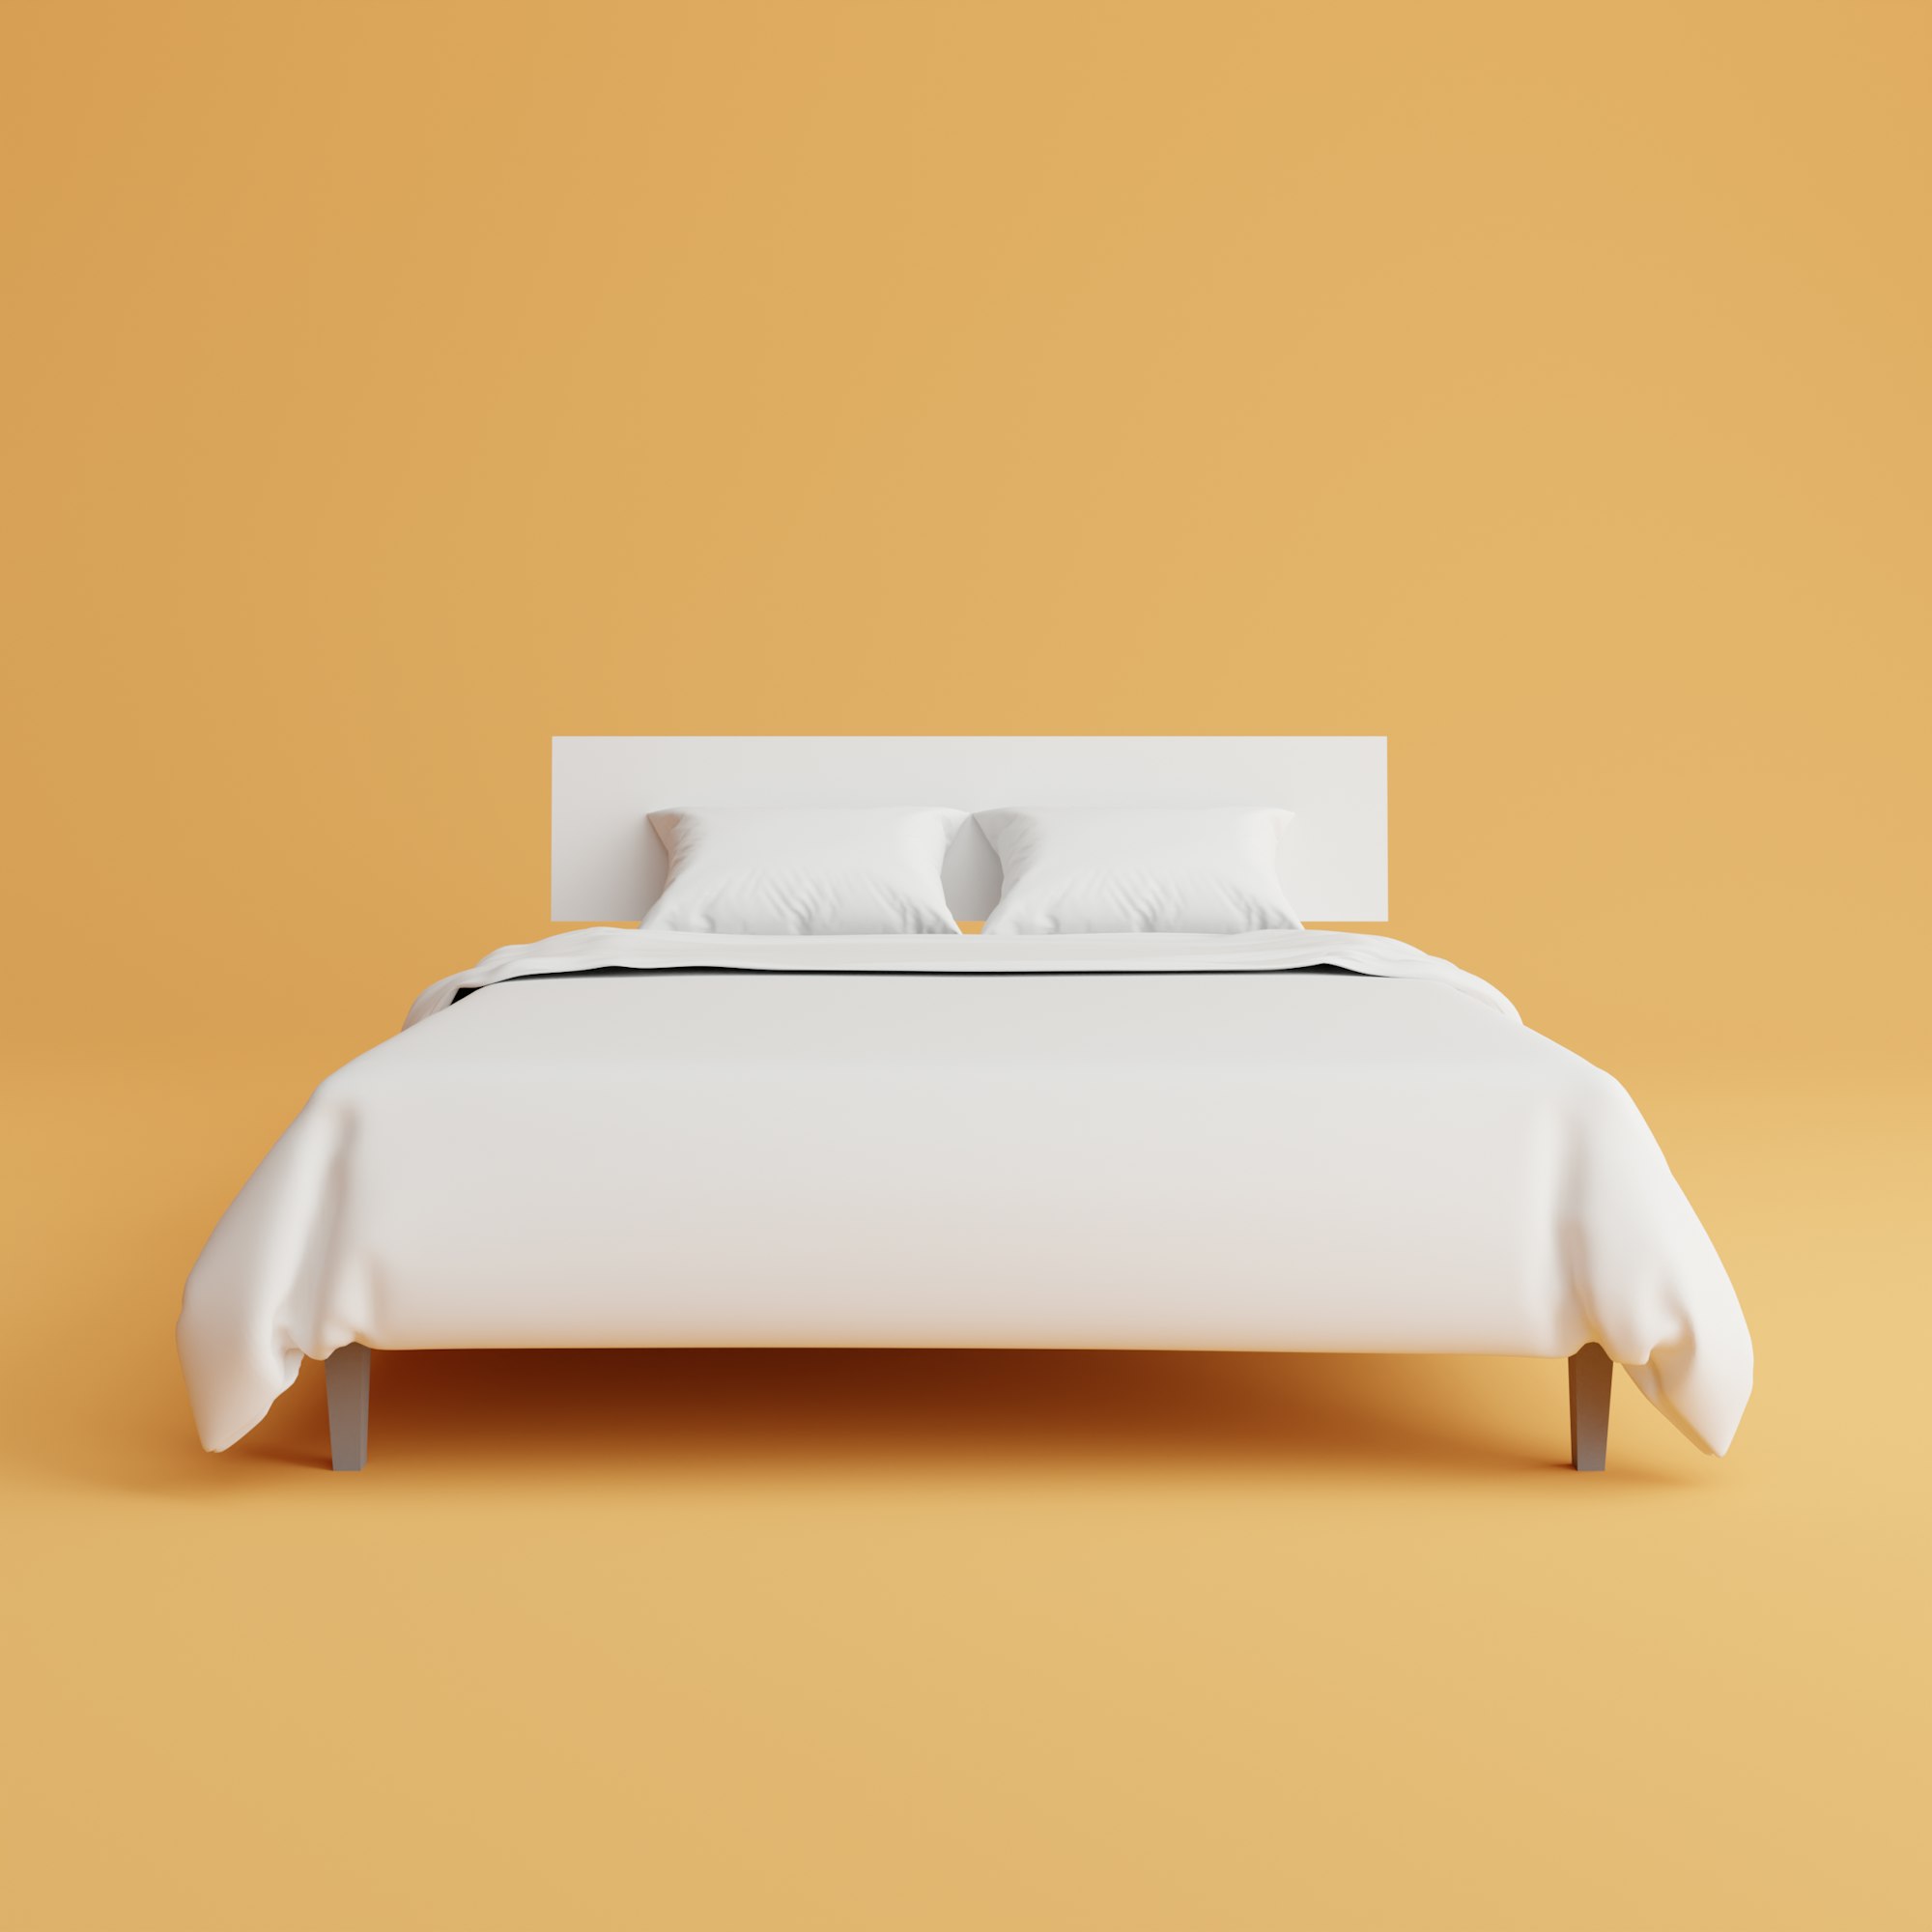 3D Render double bed with bedcover and pillow on yellow background